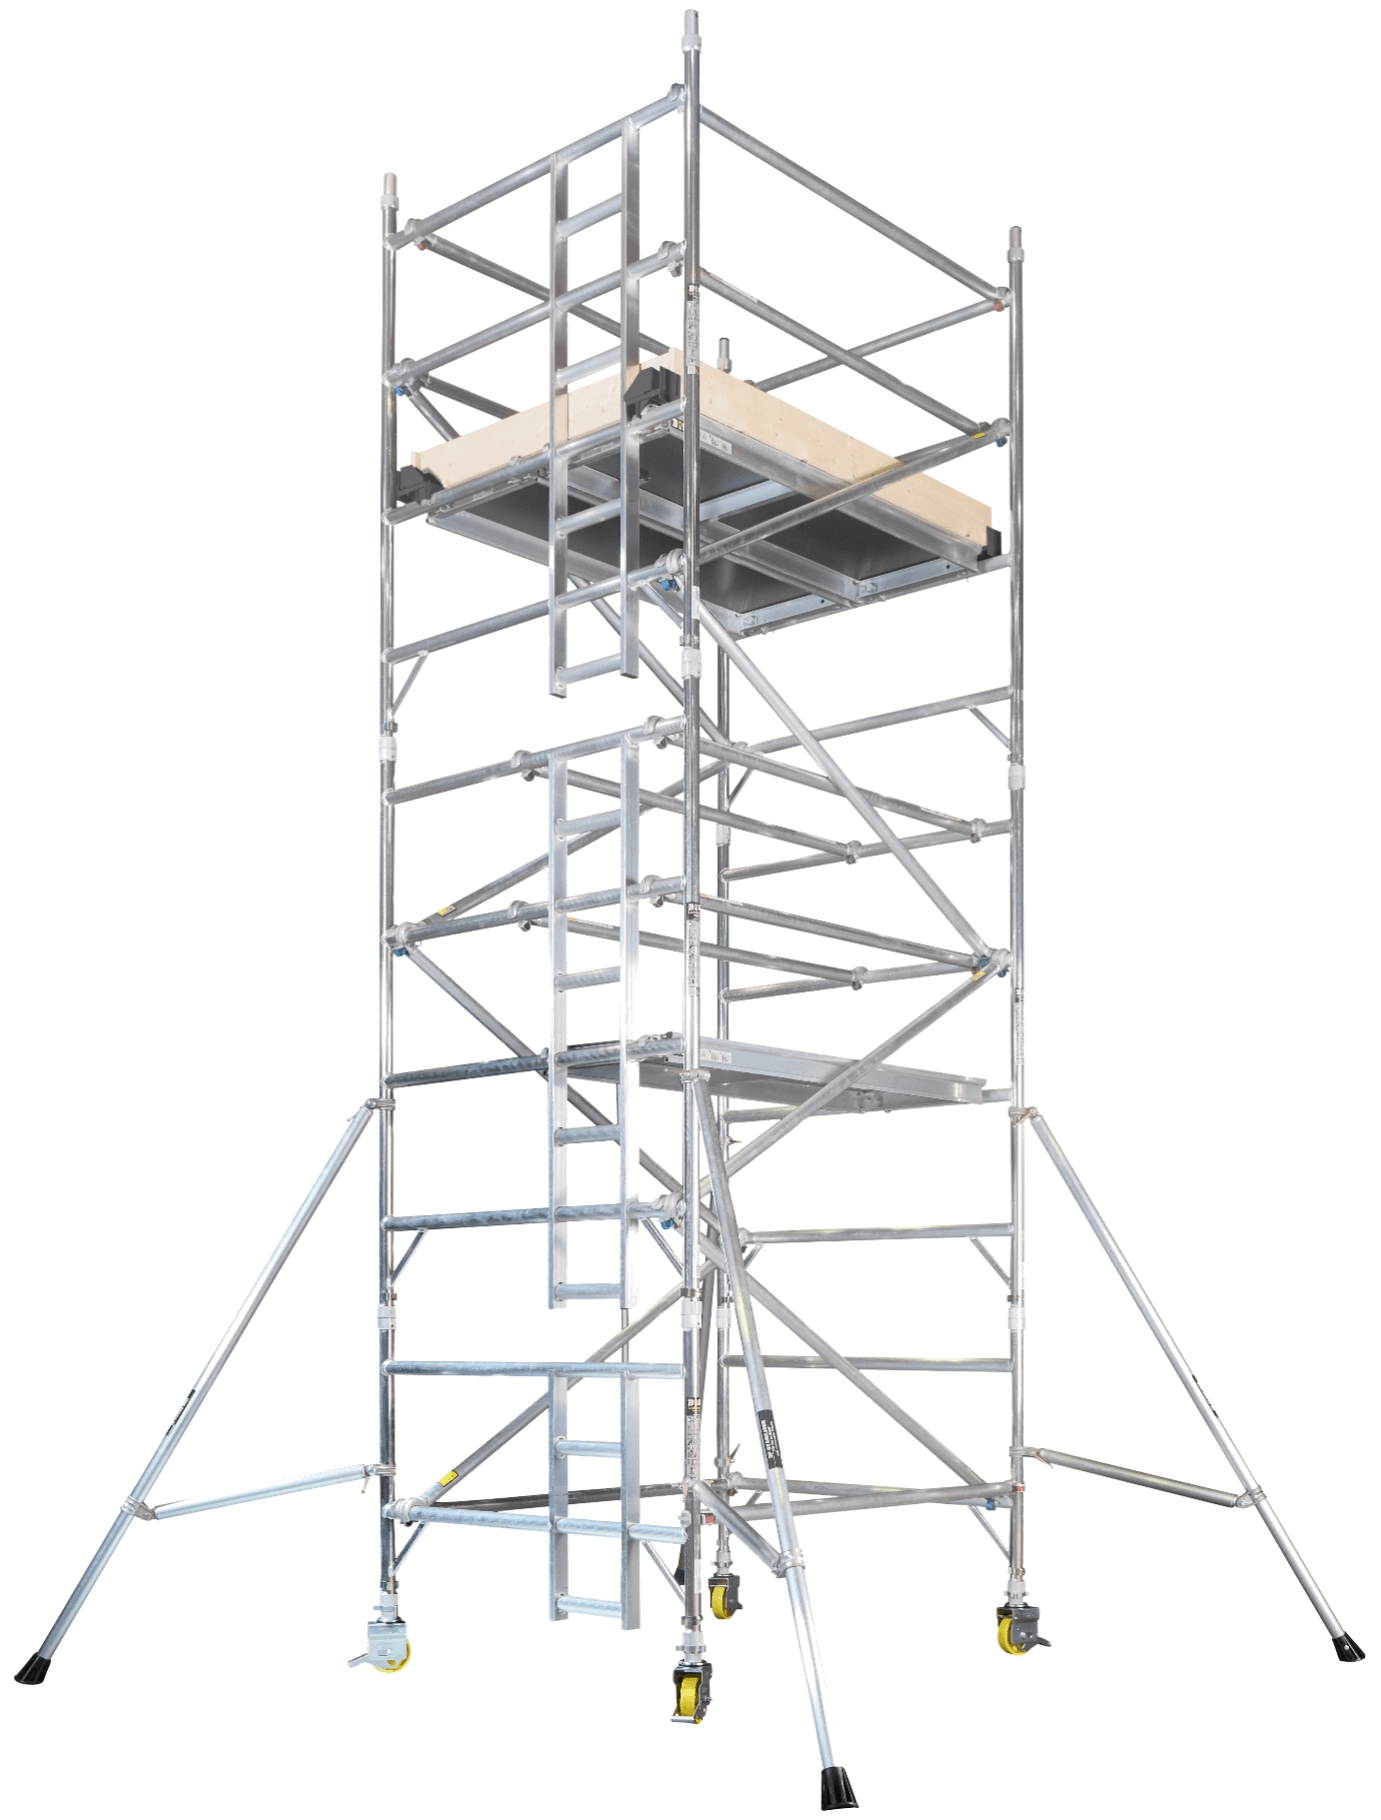 BoSS Ladderspan 3T Towers for general use